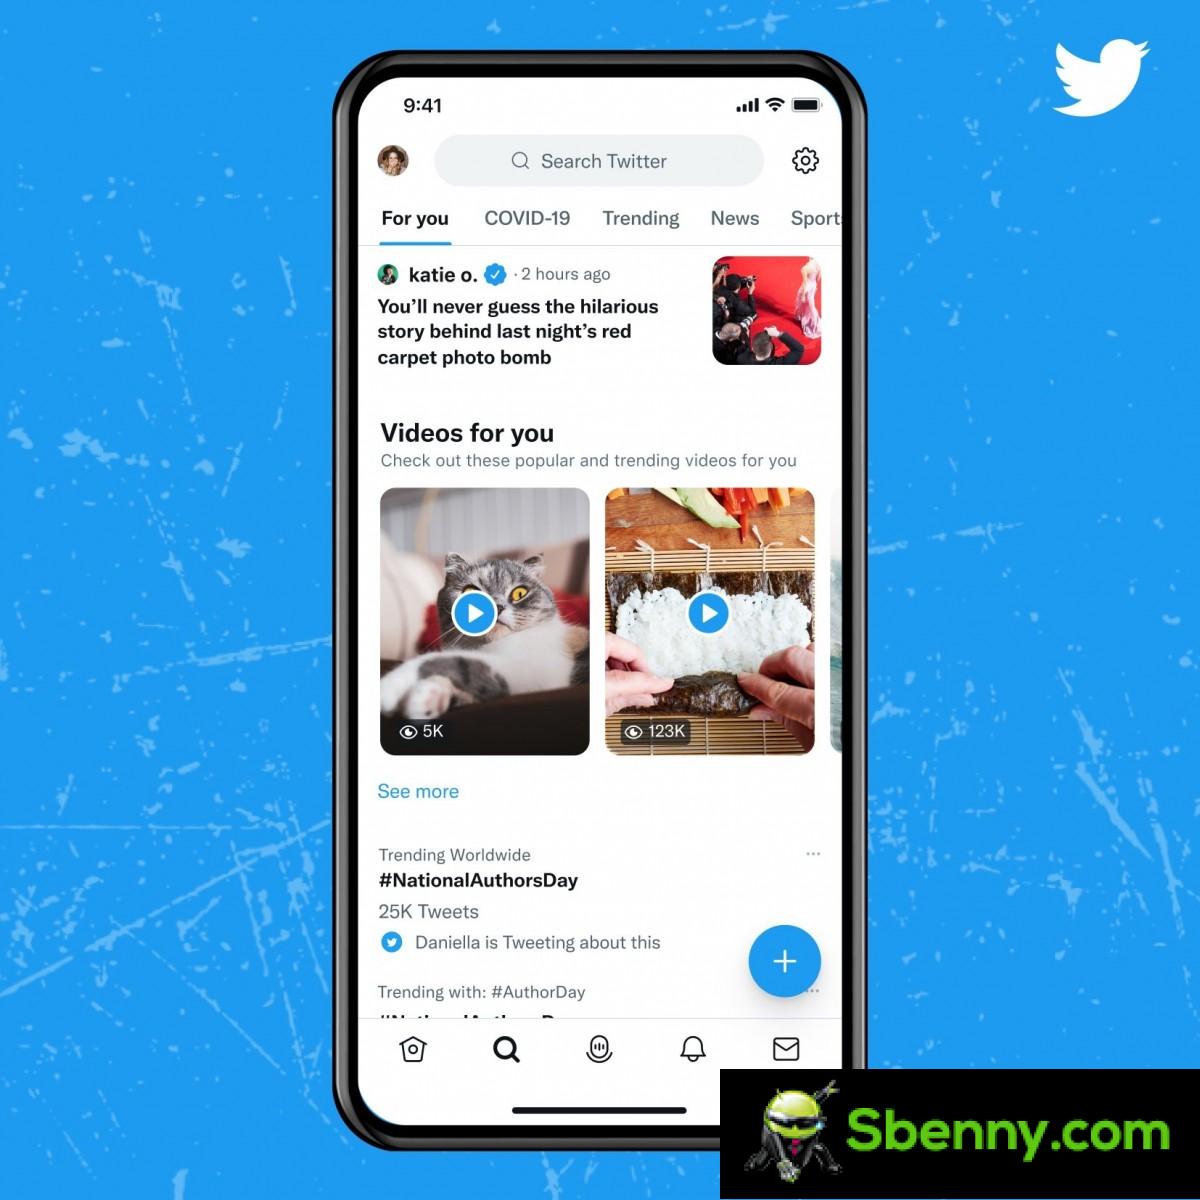 Twitter experiments with videos again, tests vertically scrolling videos